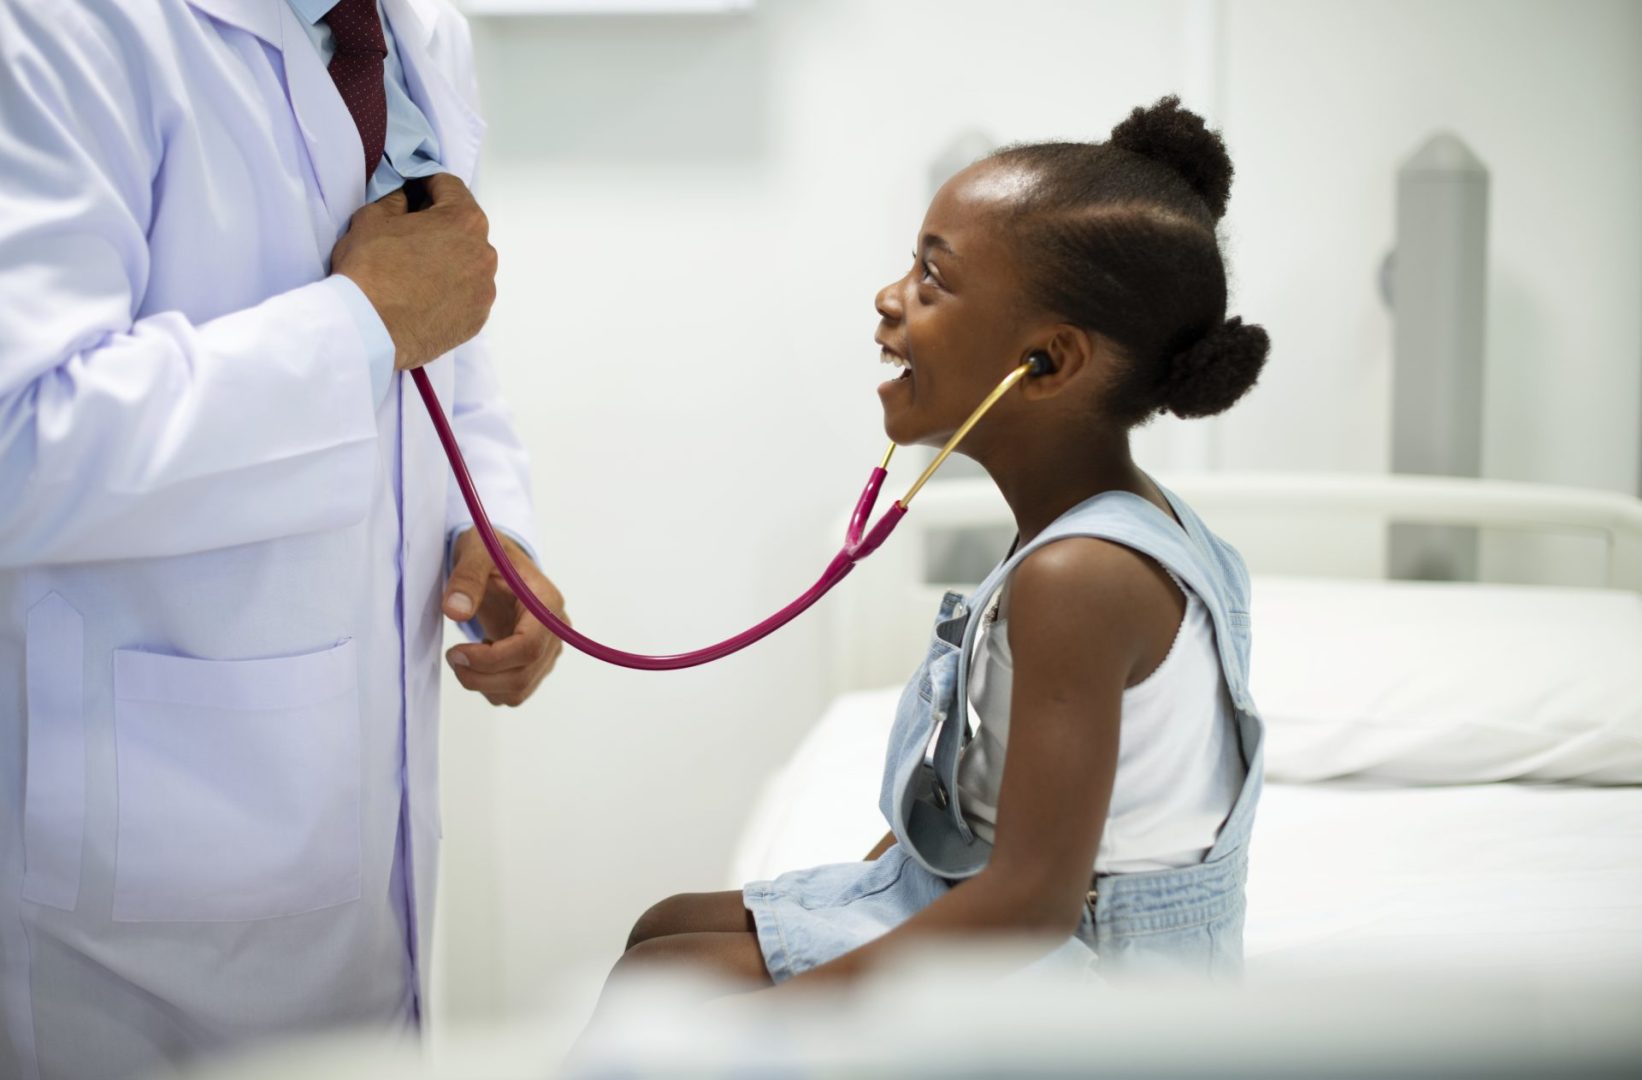 Friendly pediatrician entertaining his patient with his stethoscope